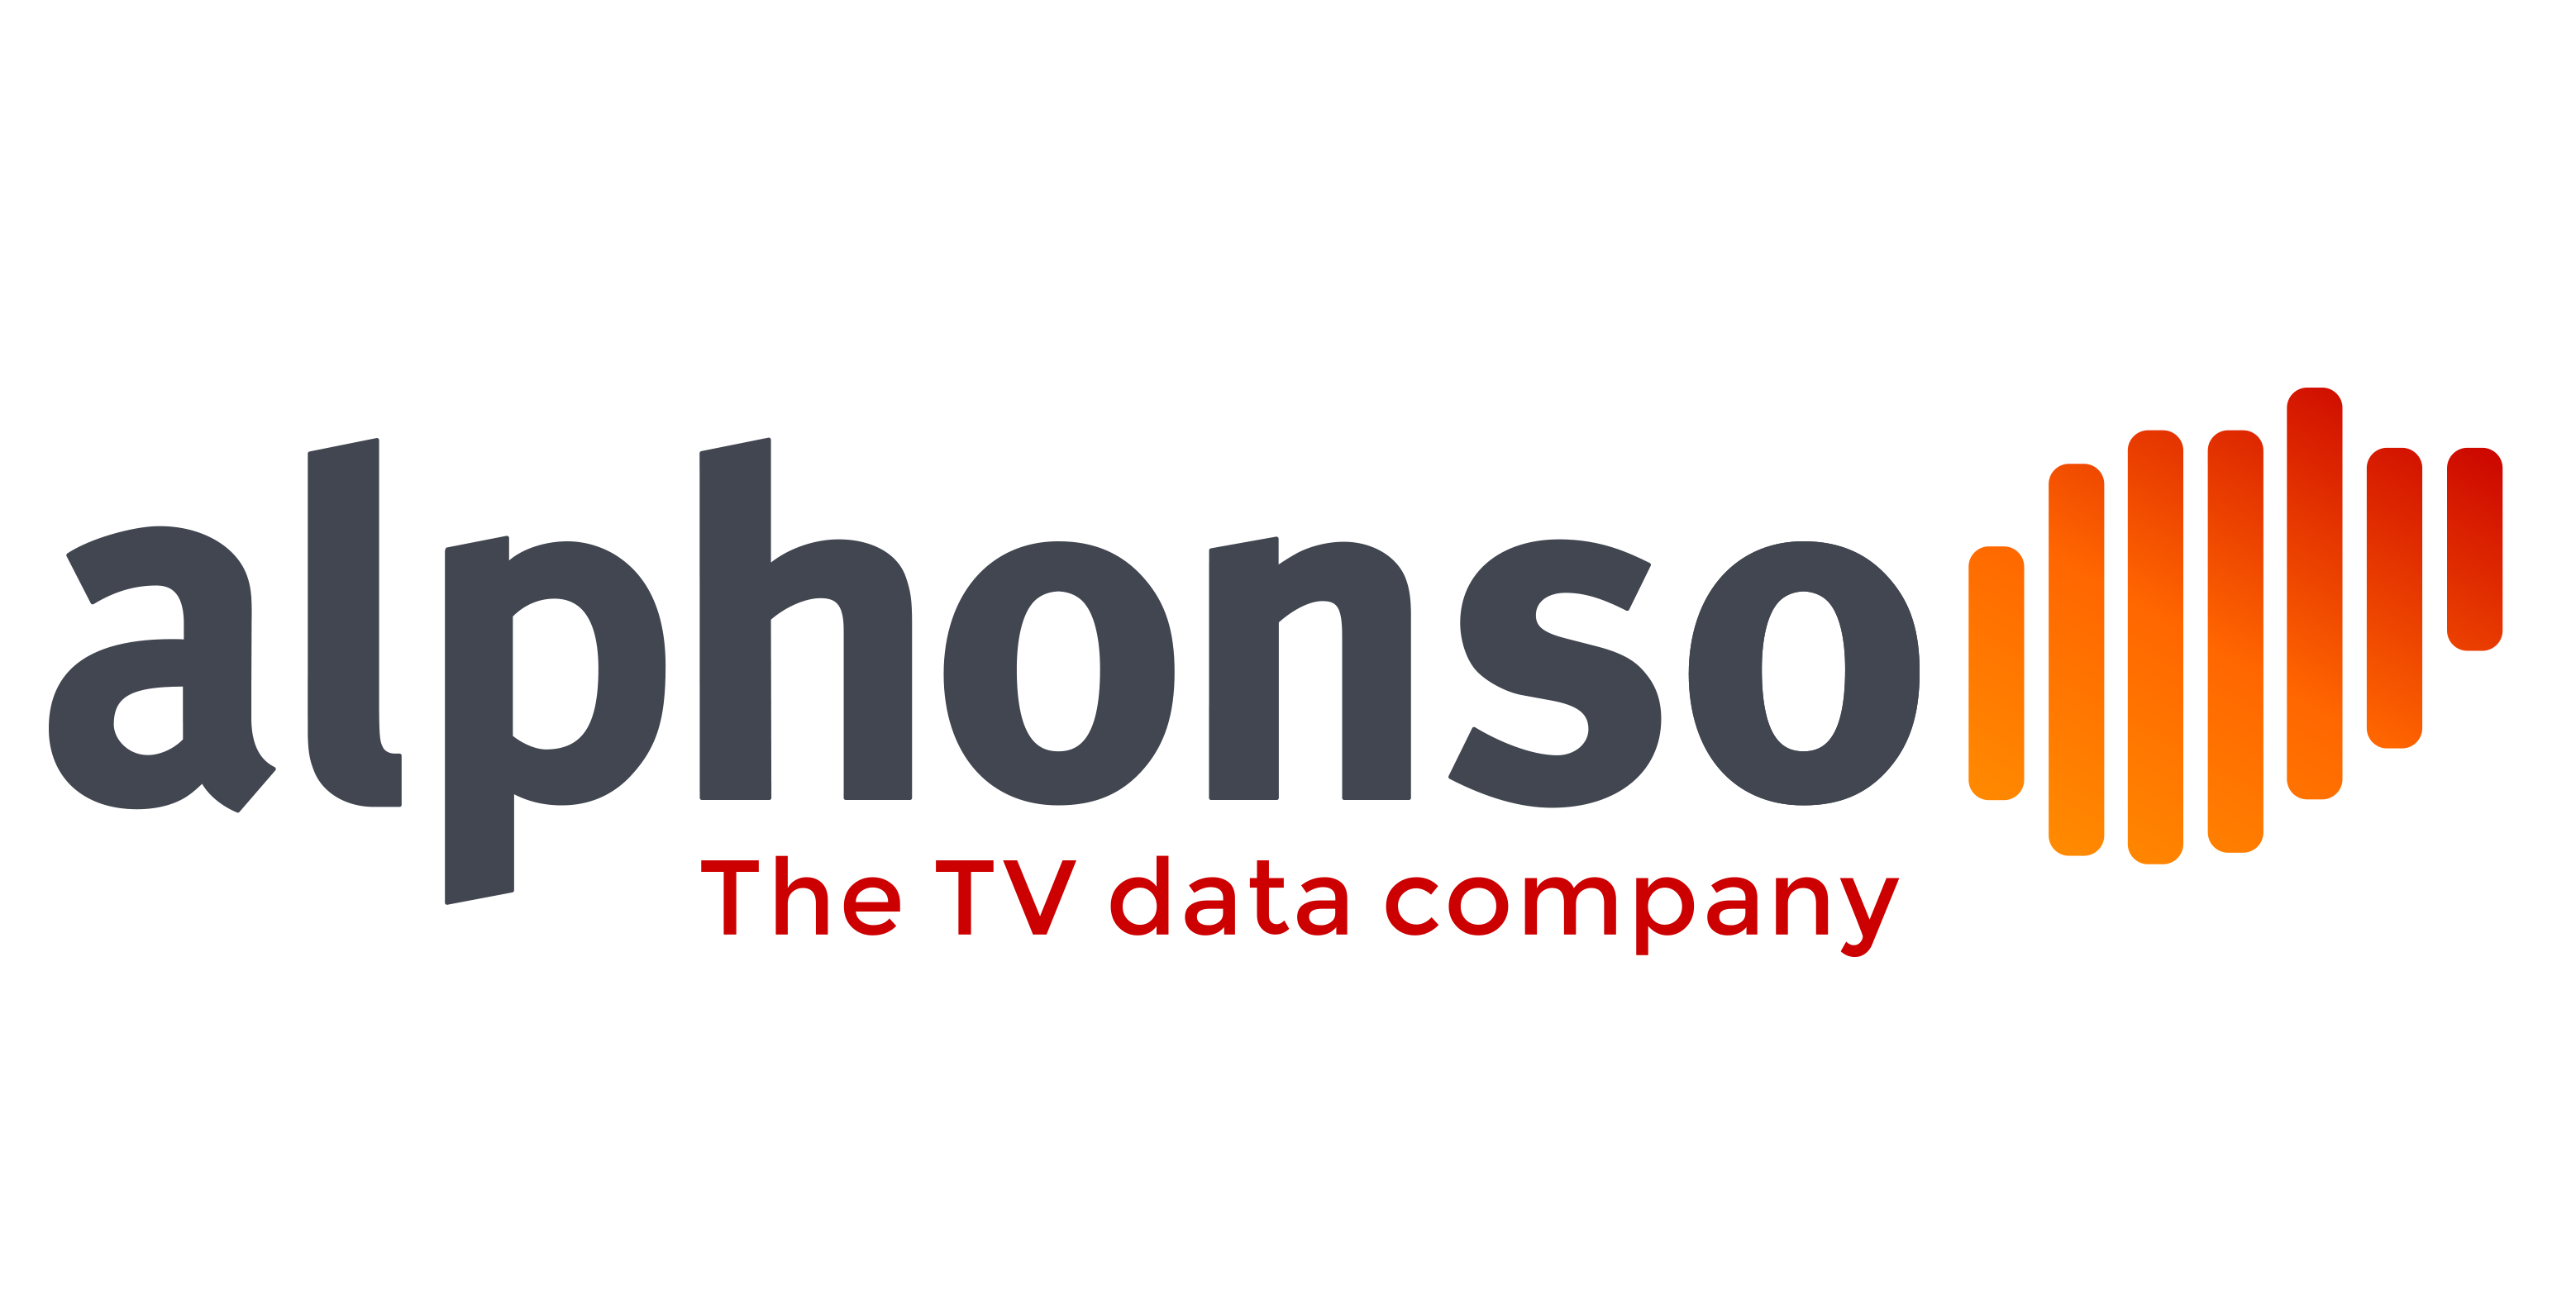 Alphonso Expands Smart TV Distribution For Video AI To Grow Its TV Audience Data Footprint